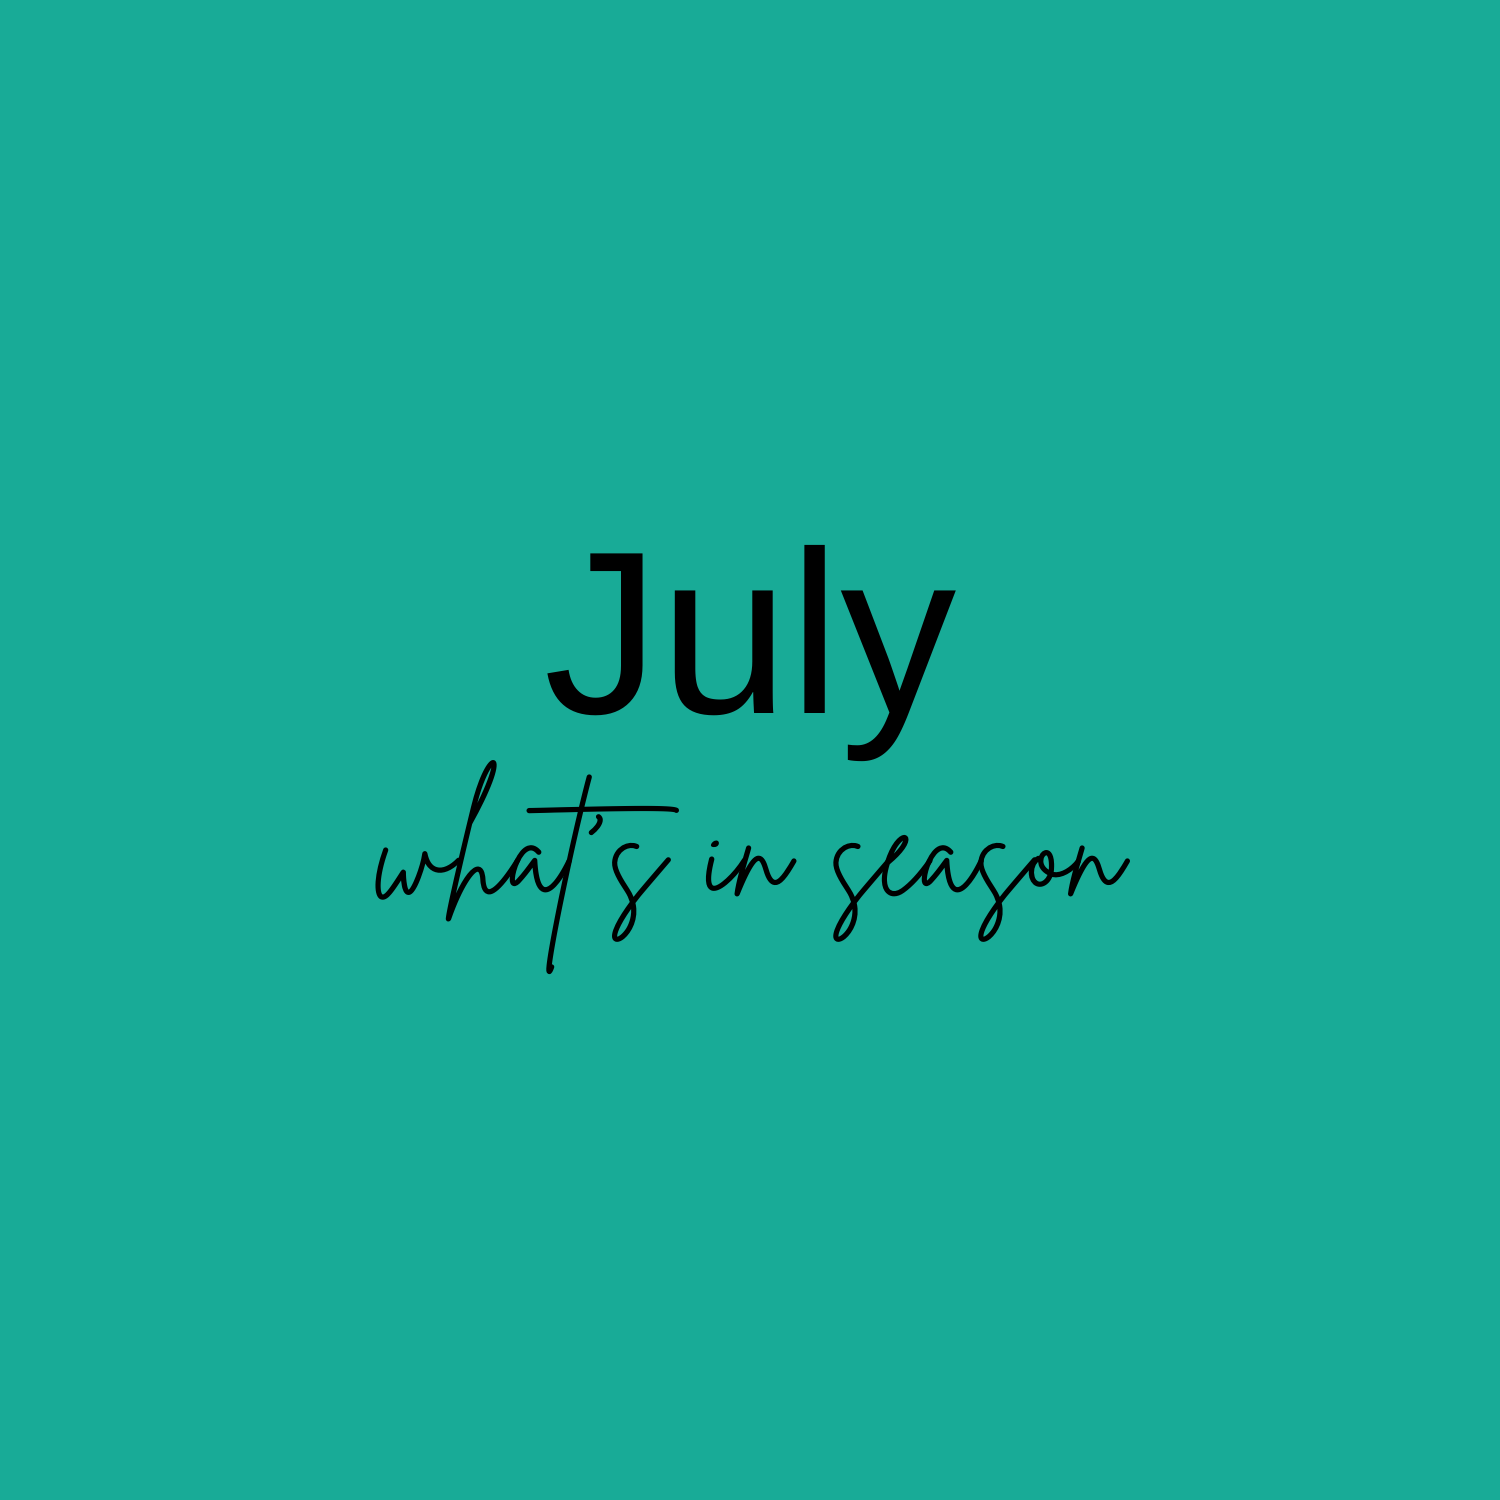 text "July - what's in season"